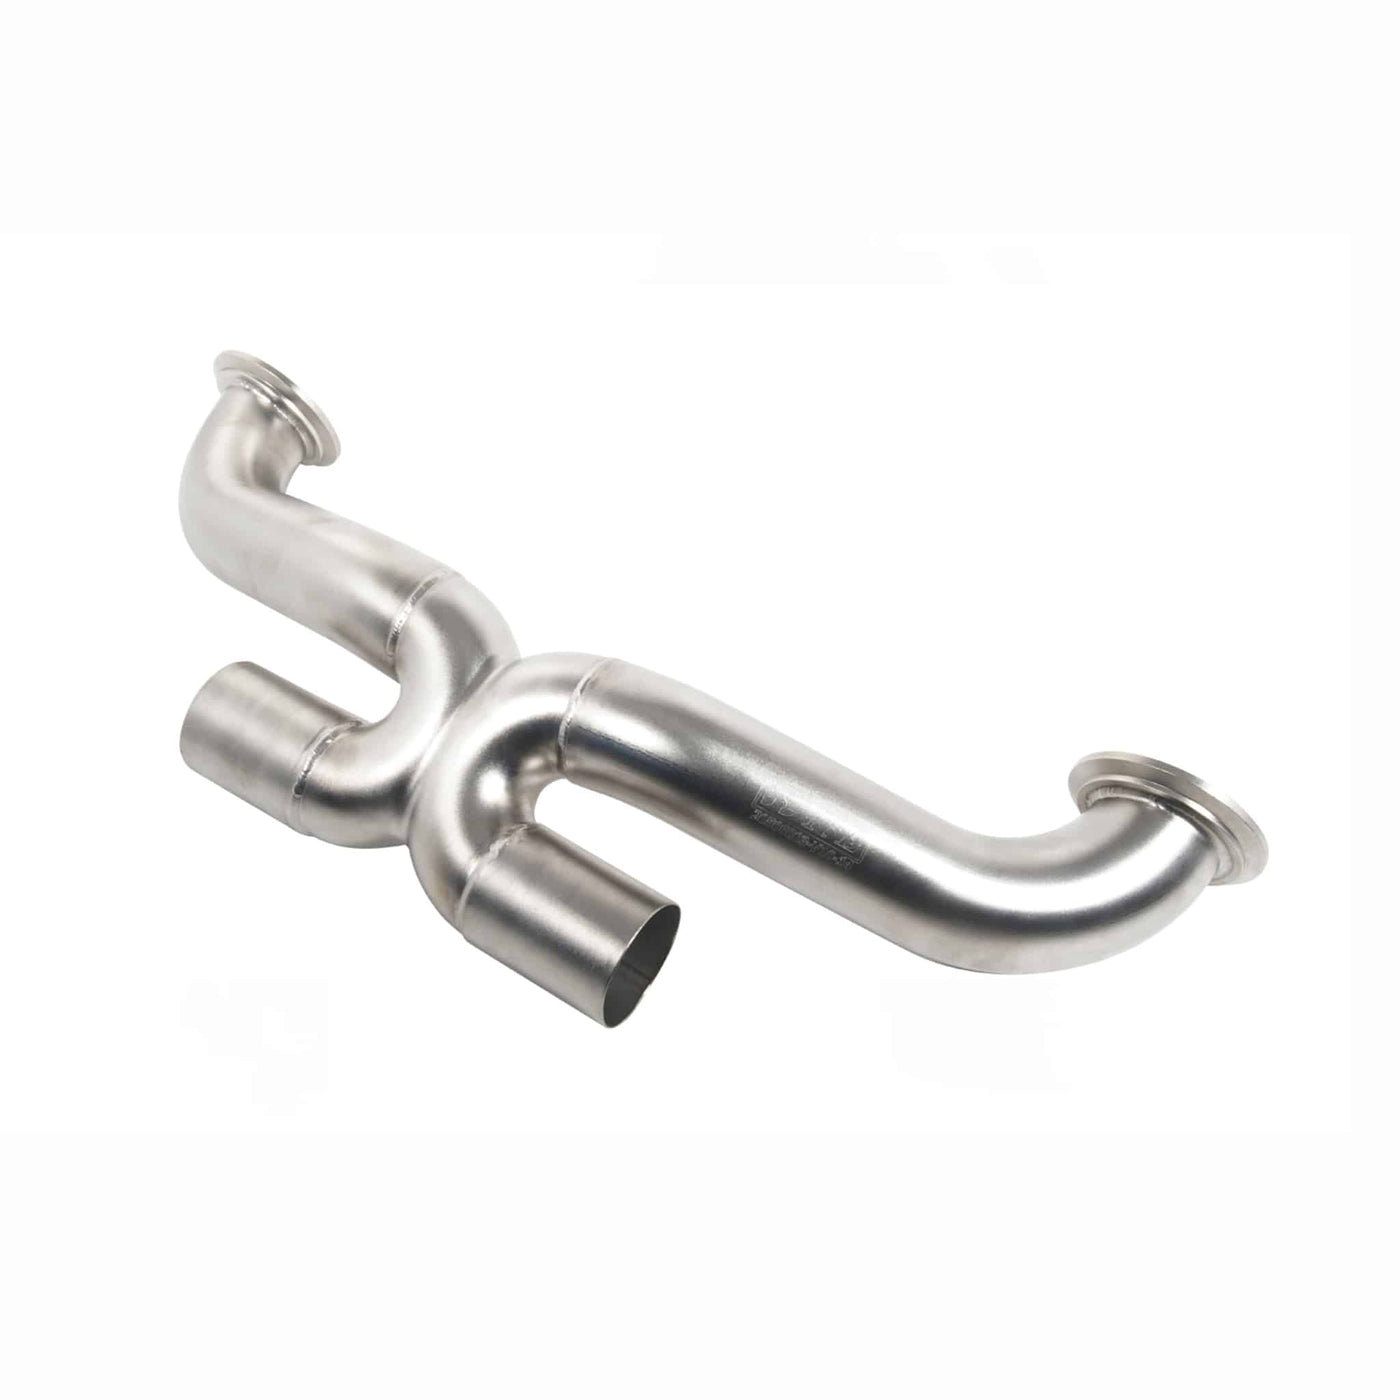 Audi R8 Performance Facelift Exhaust System - Linkpipe